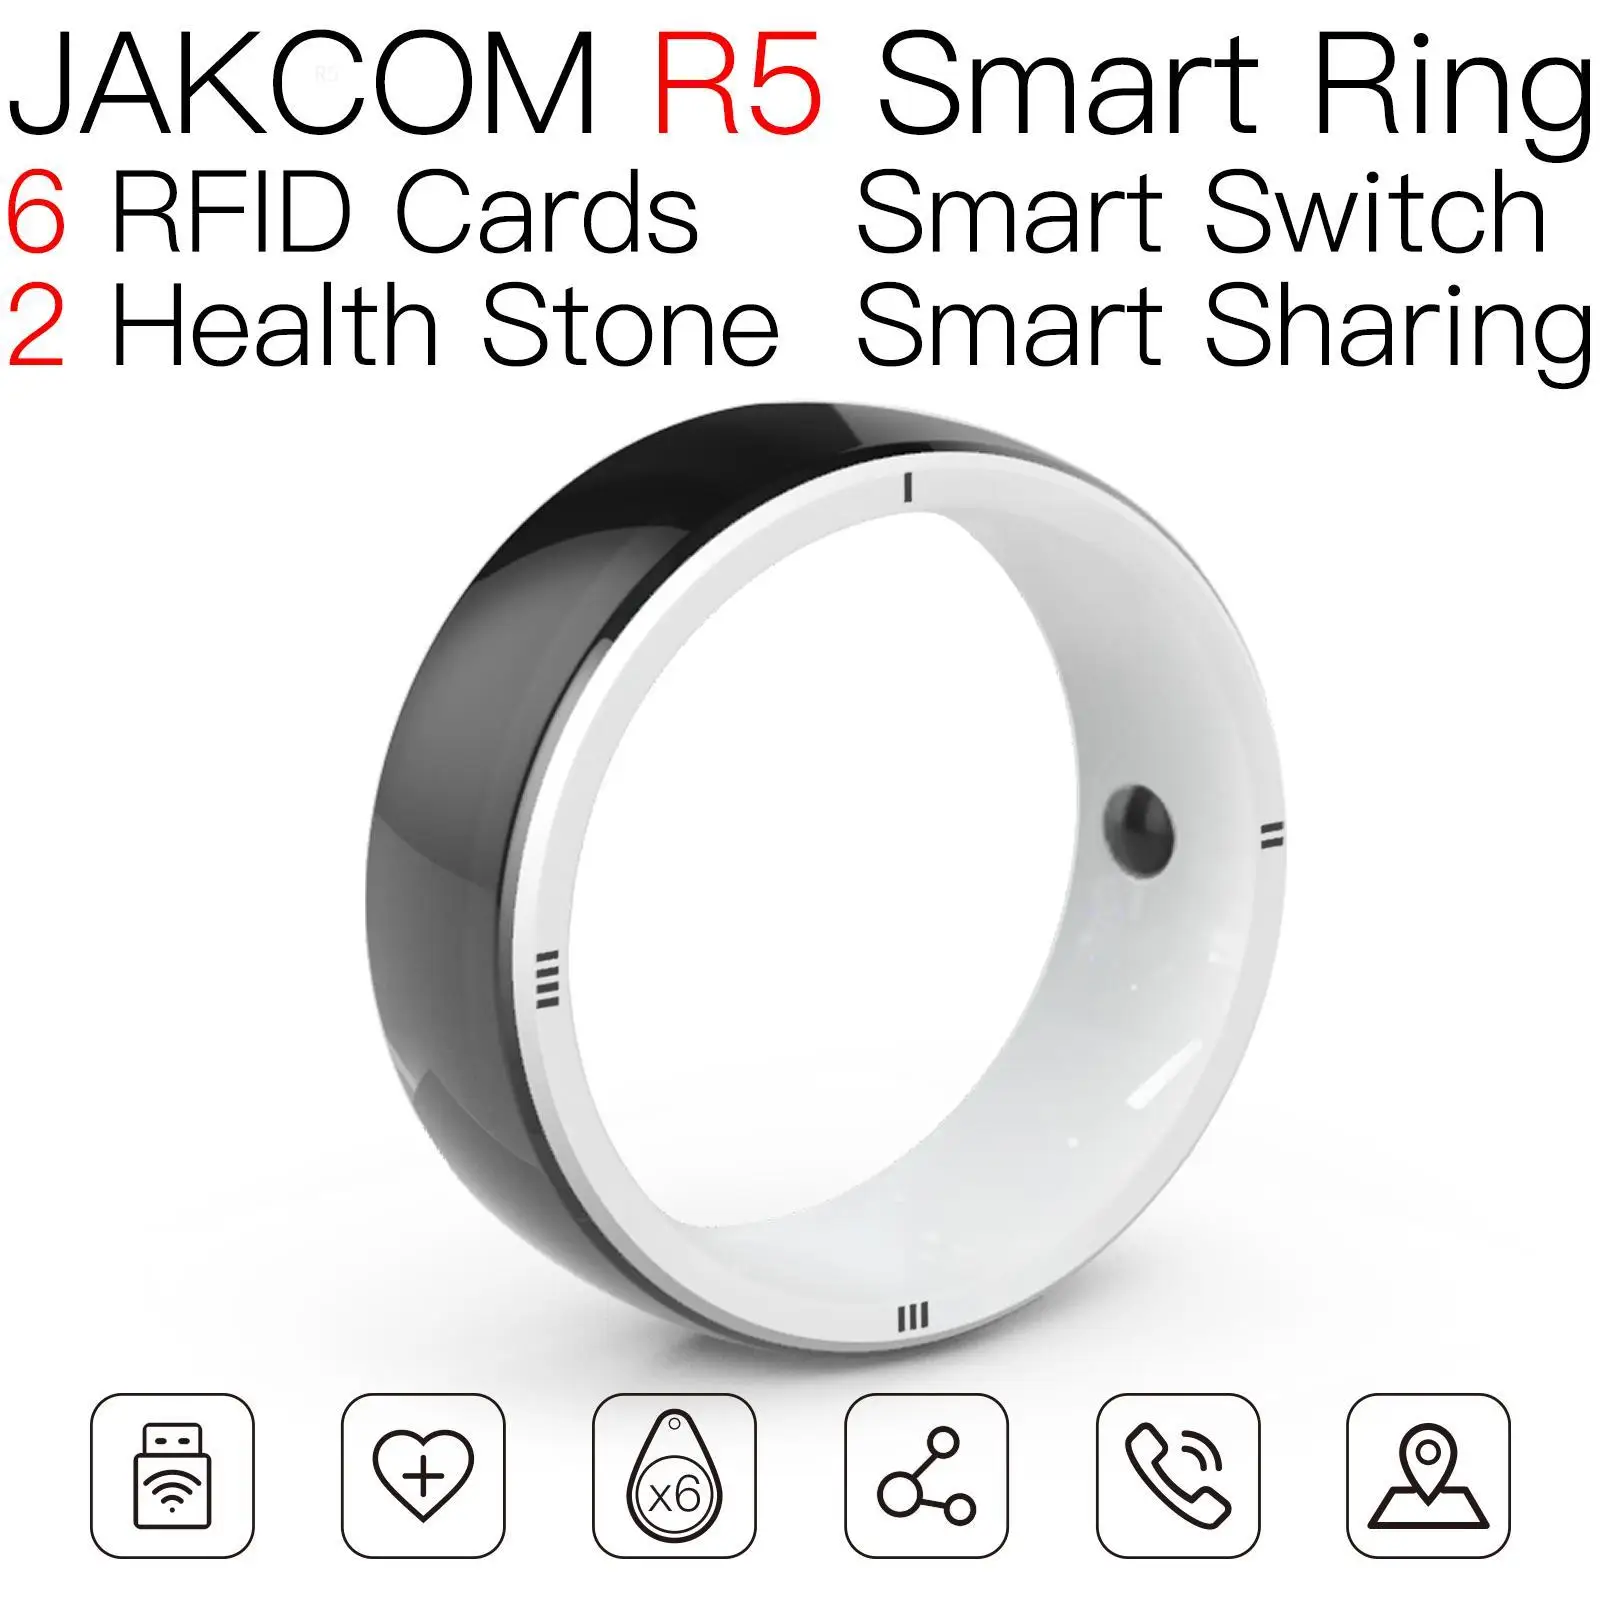 

JAKCOM R5 Smart Ring Super value than ns chip plant labels nfc tag 213 door lock with custom logo hf rfid laundry protection